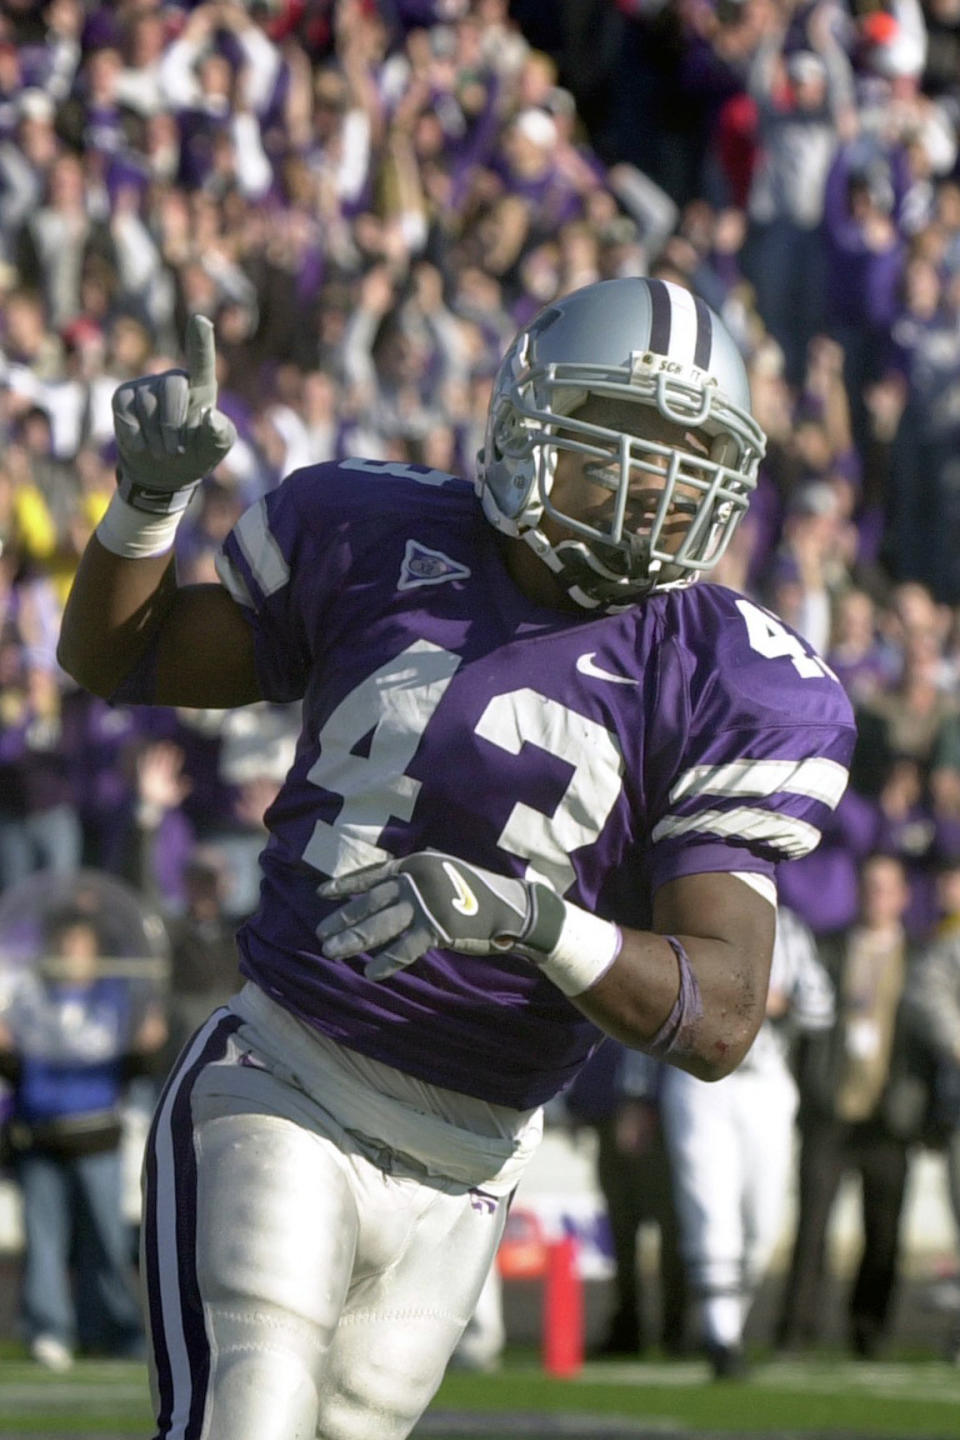 FILE - In this Nov. 16, 2002, file photo, Kansas State running back Darren Sproles celebrates after scoring a touchdown in the fourth quarter of an NCAA college football game, in Manhattan, Kan. Georgia cornerback Champ Bailey, Syracuse defensive end Dwight Freeney and Kansas State running back Darren Sproles will appear on the College Hall of Fame ballot for the first time. The National Football Foundation announced Tuesday, June 16, 2020, the 78 players and seven coaches from major college who are up for selection to the Hall of Fame. (AP Photo/Charlie Riedel, File)